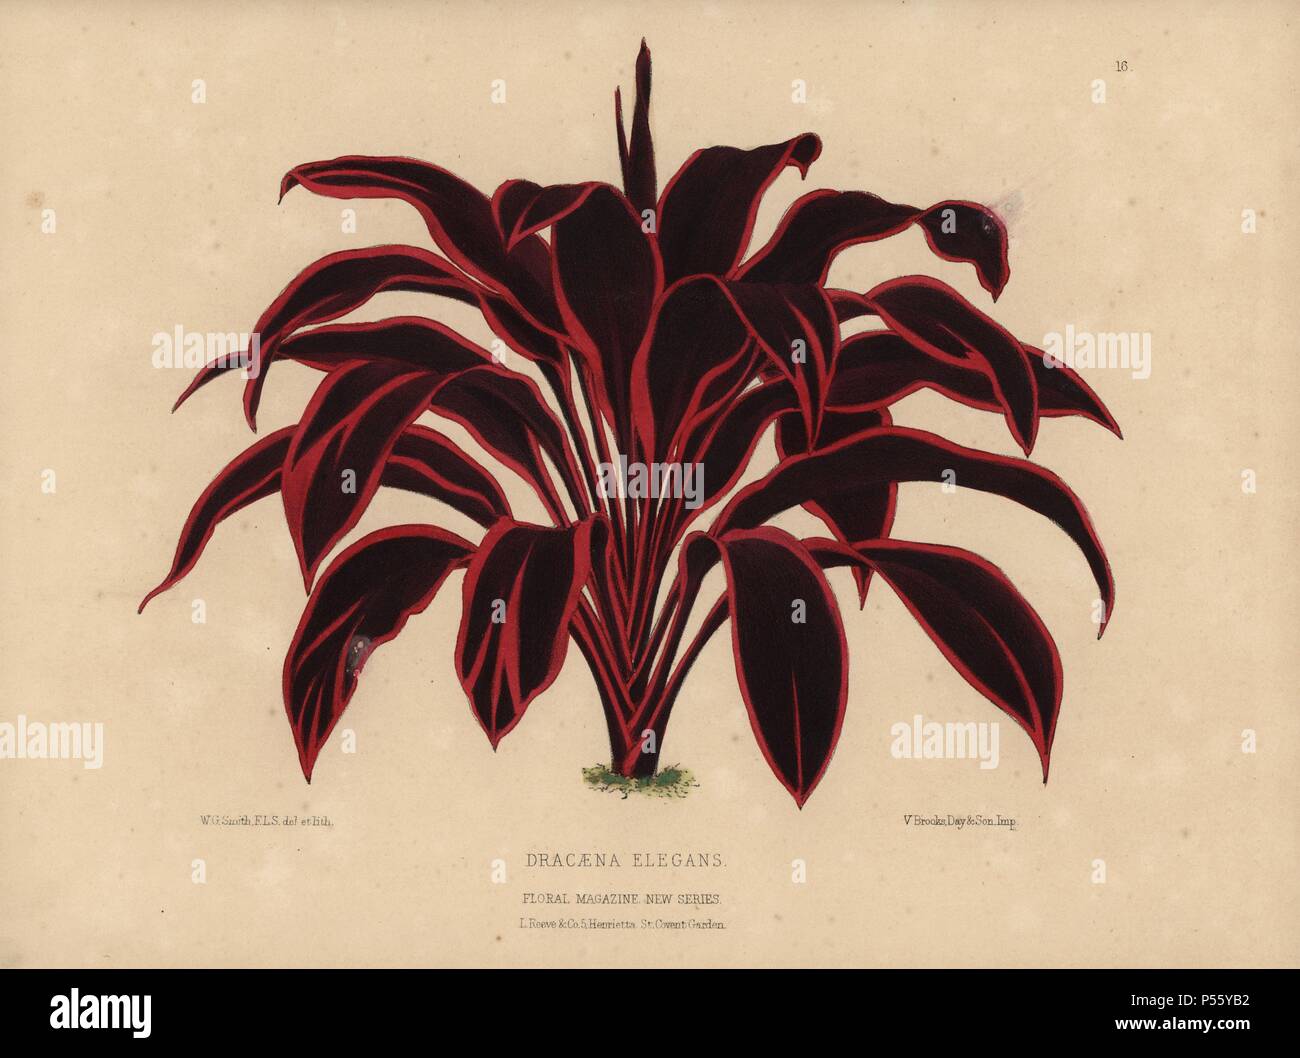 Dracaena elegans, tropical plant with dramatic crimson and black foliage Handcolored botanical drawn and lithographed by W.G. Smith from H.H. Dombrain's 'Floral Magazine' 1872.. Worthington G. Smith (1835-1917), architect, engraver and mycologist. Smith also illustrated 'The Gardener's Chronicle.' Henry Honywood Dombrain (1818-1905), clergyman gardener, was editor of the 'Floral Magazine' from 1862 to 1873. Stock Photo